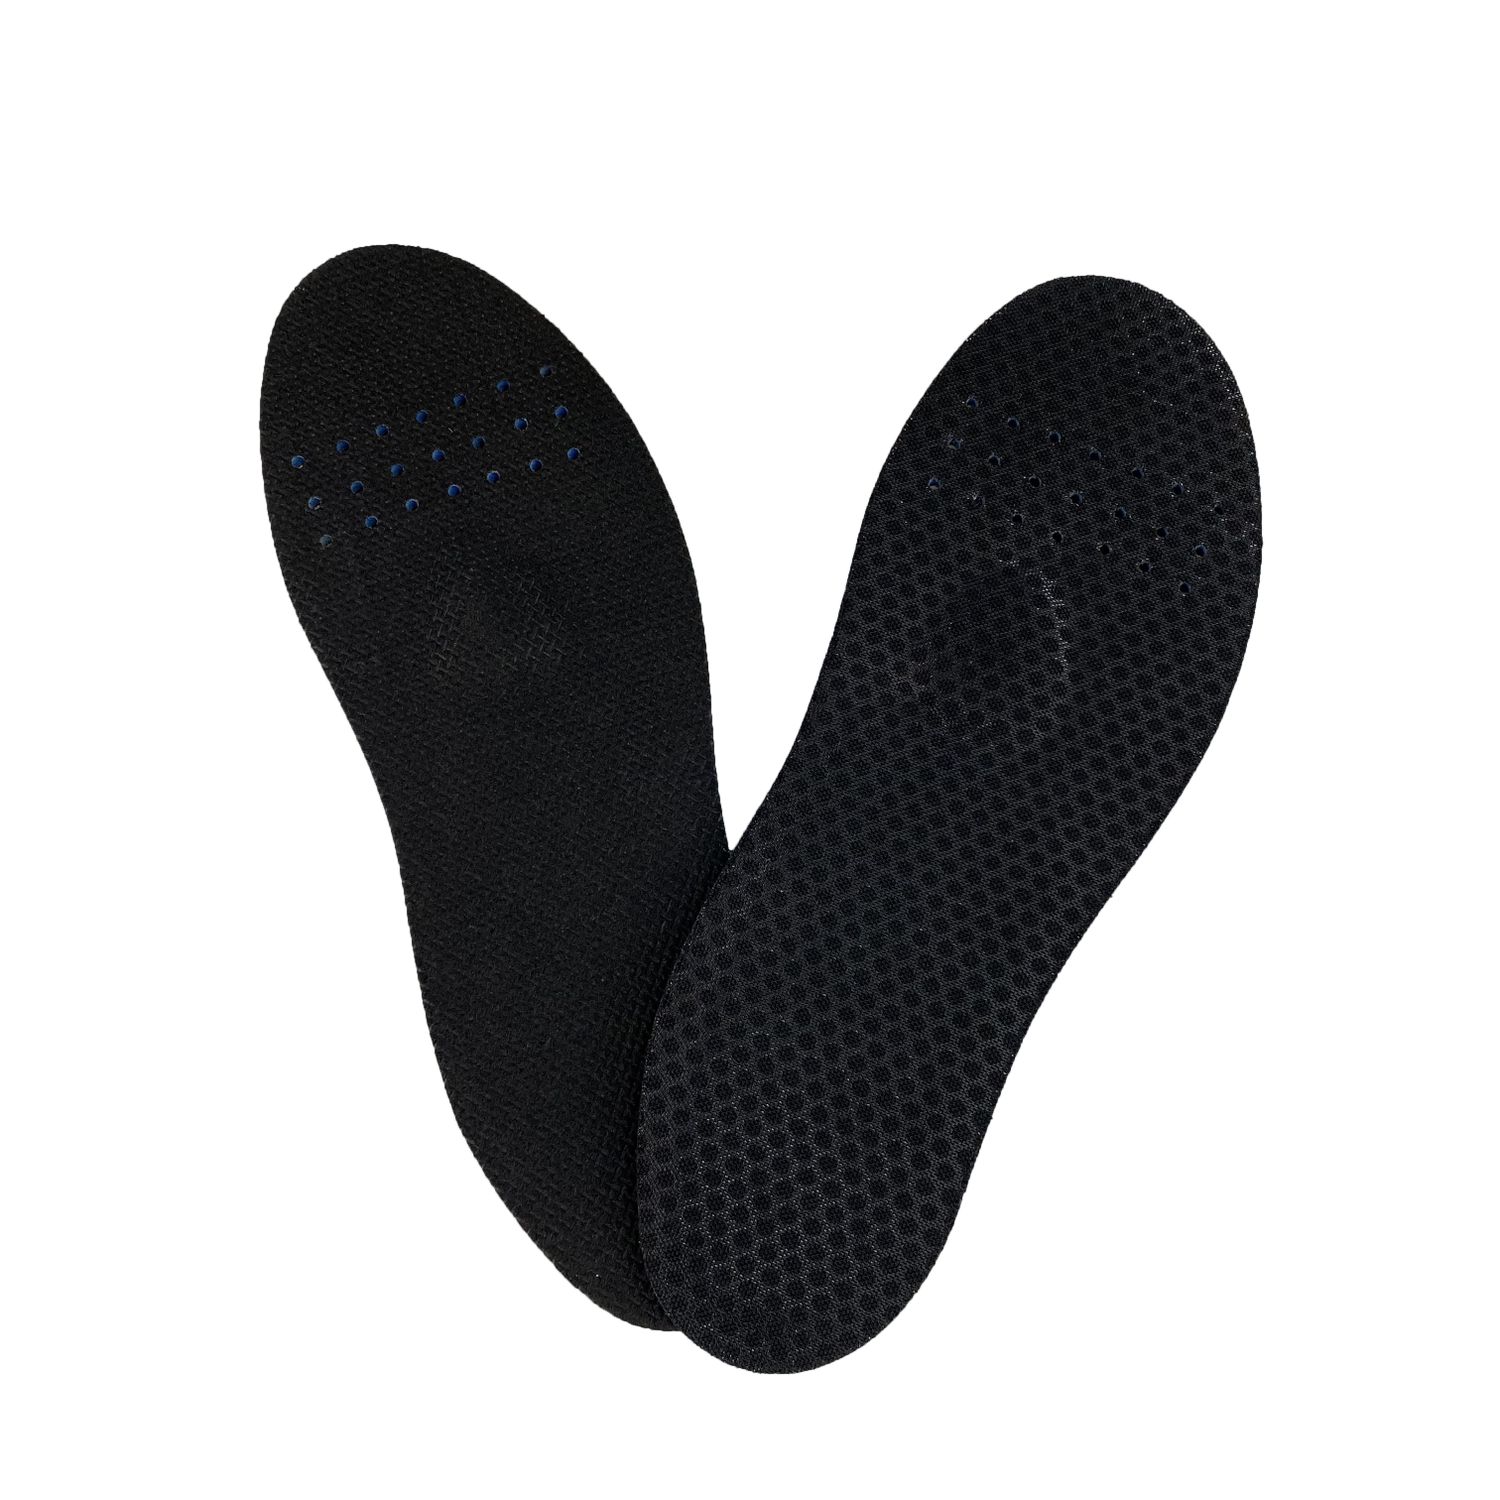 Lee Mat Wholesale Custom Made Moldable Insoles for Flat Feet